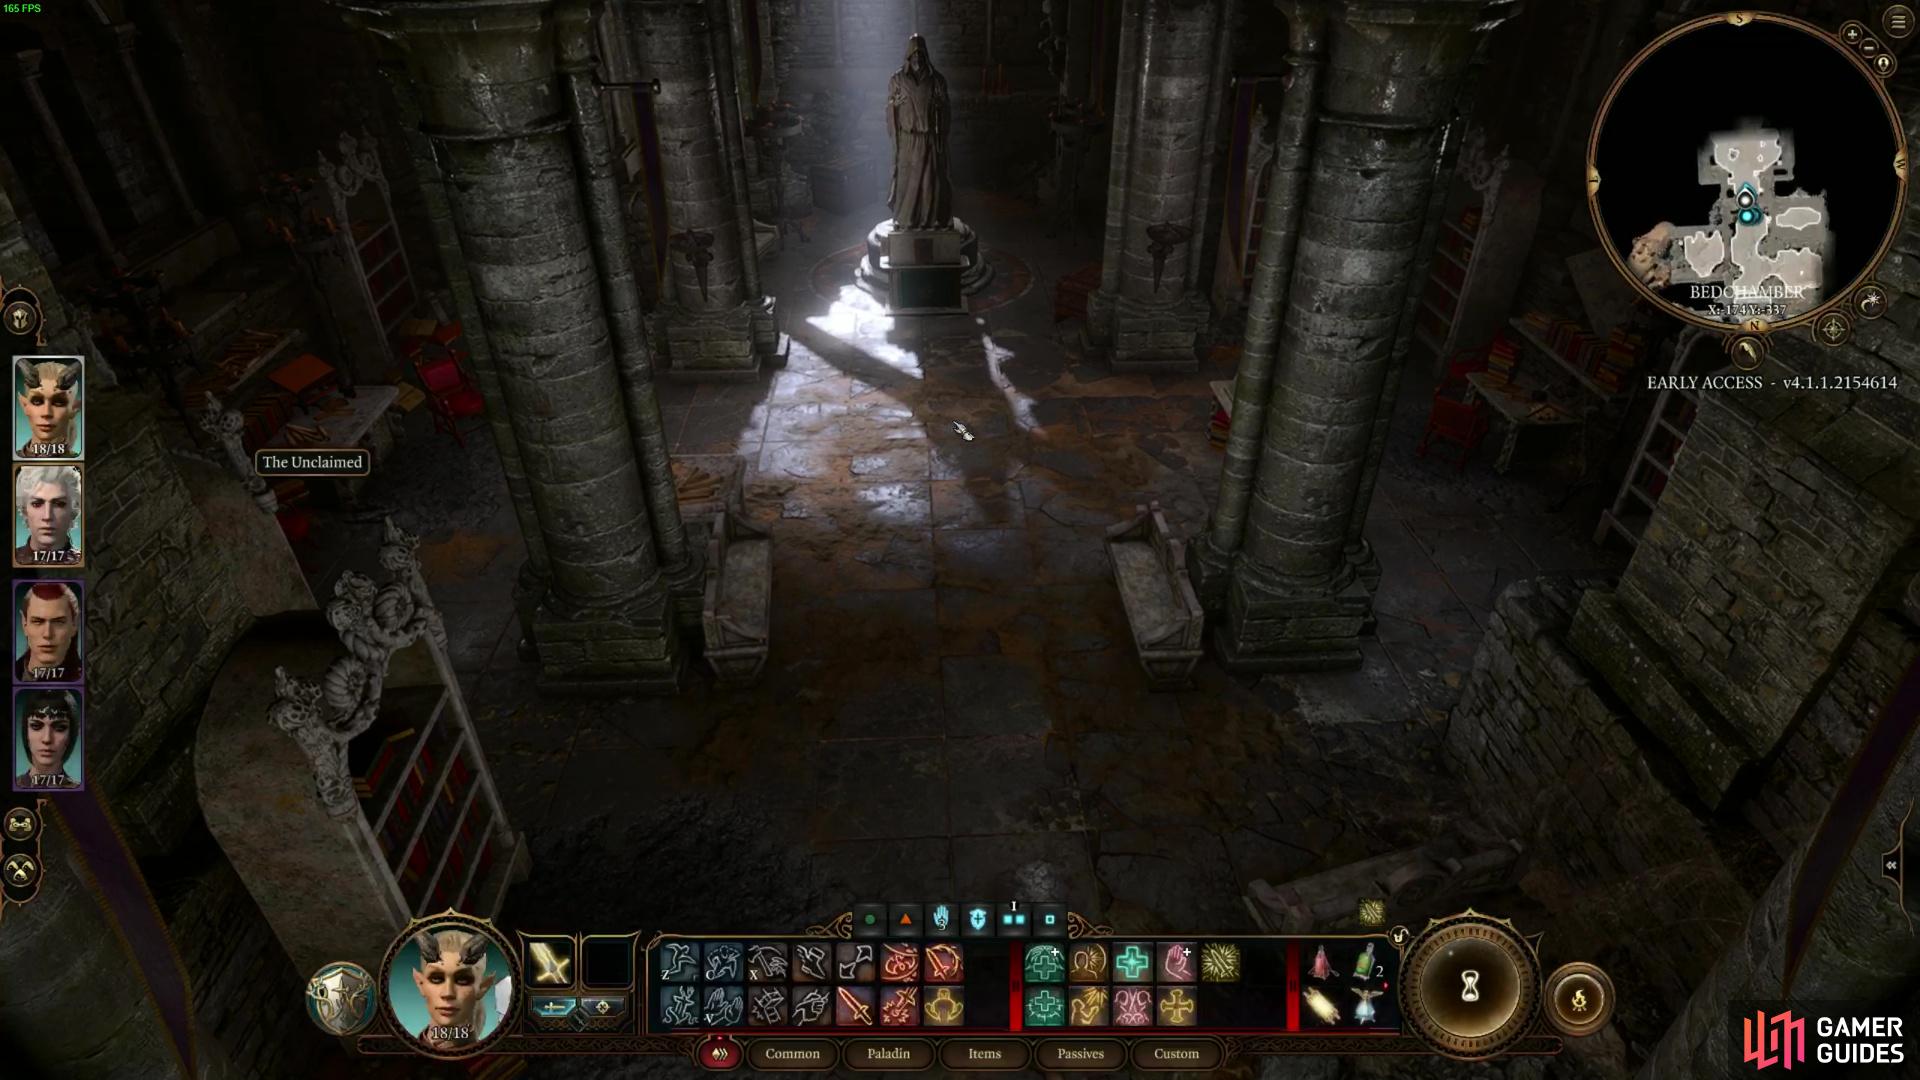 To enter the Dank Crypt in Baldurs Gate 3, you need to enter the library of the Chapel and activate a switch.